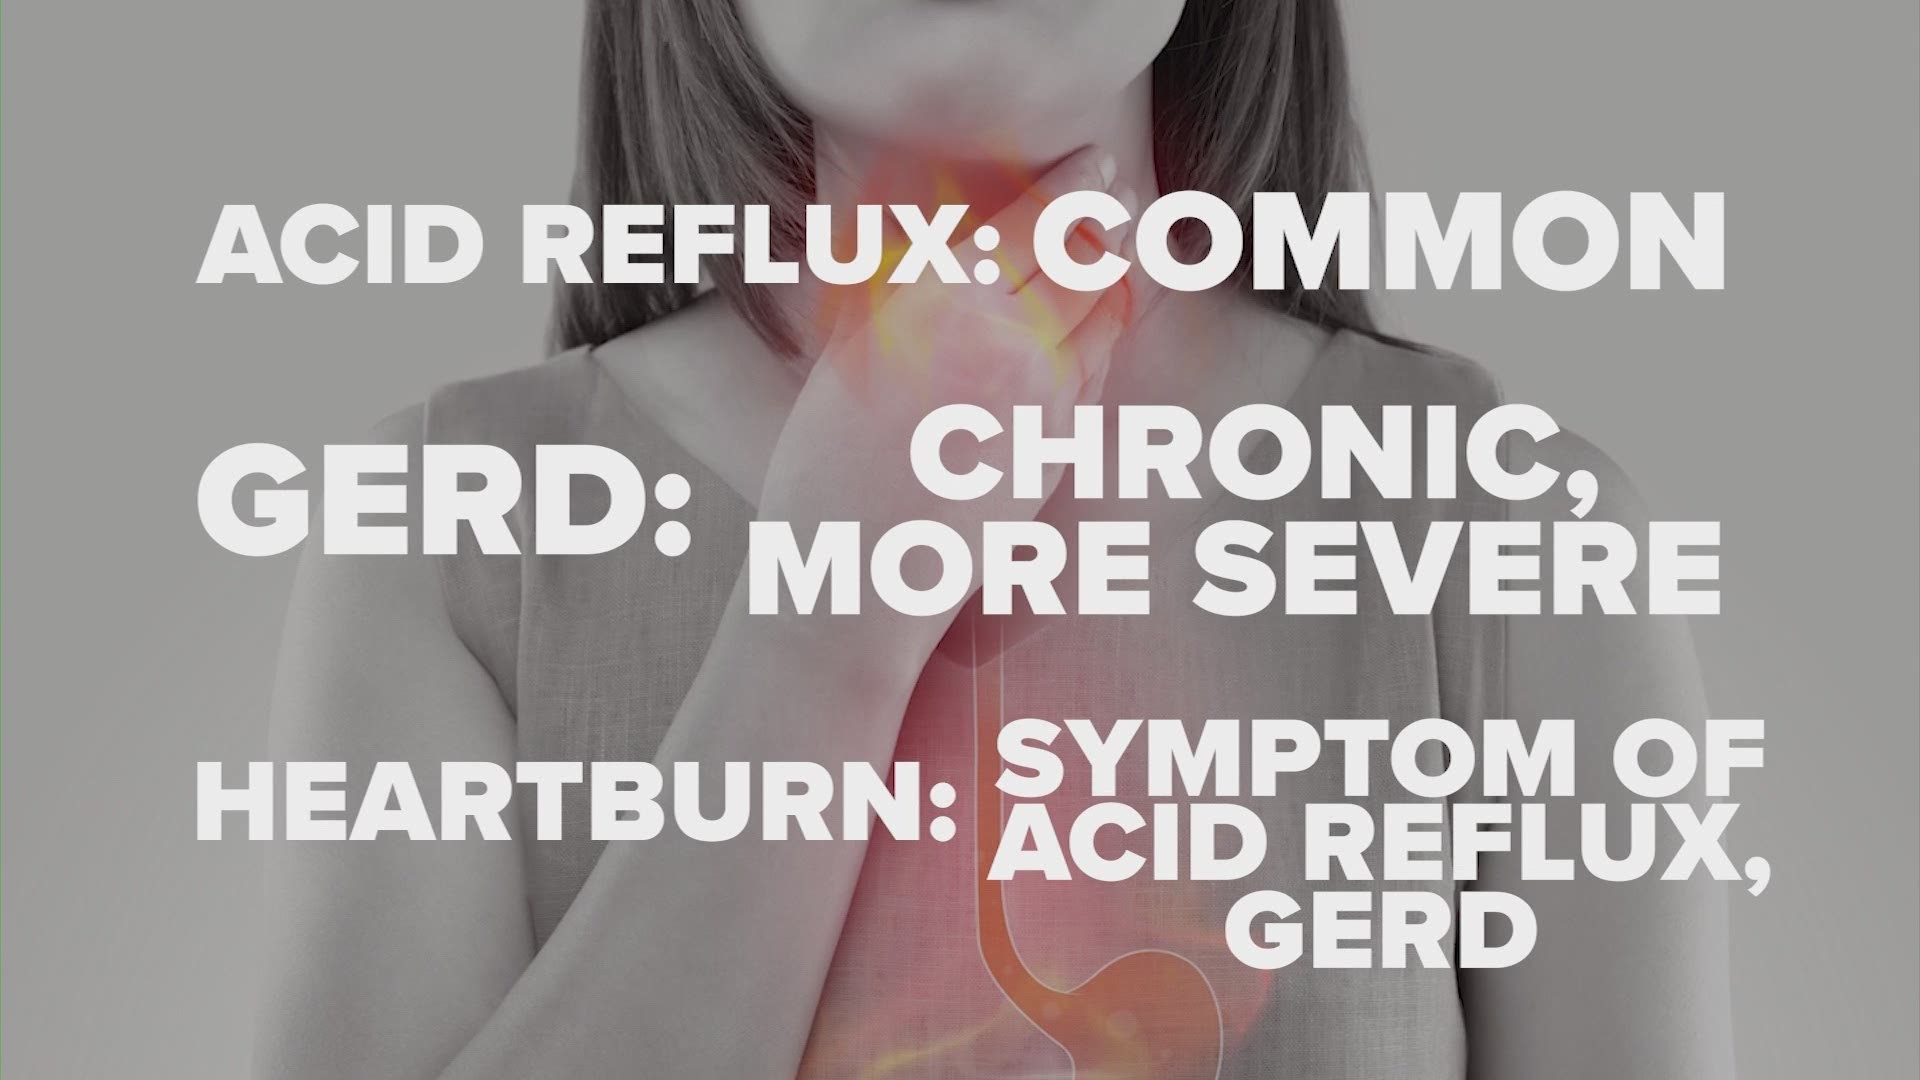 Between red meat, spicy or fried foods, alcohol and tomatoes, there are many things that can trigger acid reflux. Sometimes it's an indication of a bigger problem.